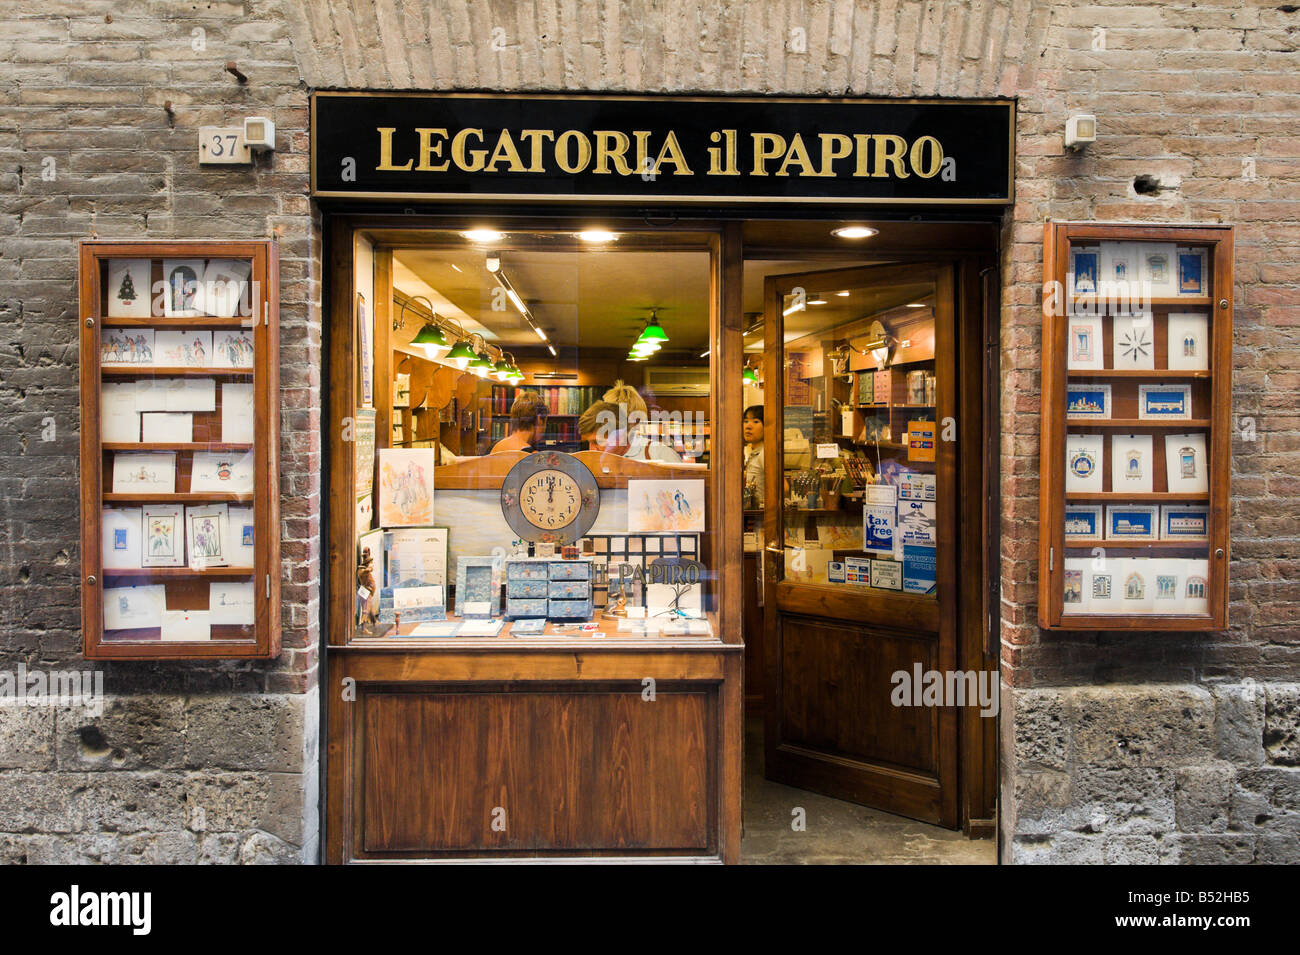 Doorway of a stationery shop in the centre of the old town, Siena, Tuscany, Italy Stock Photo